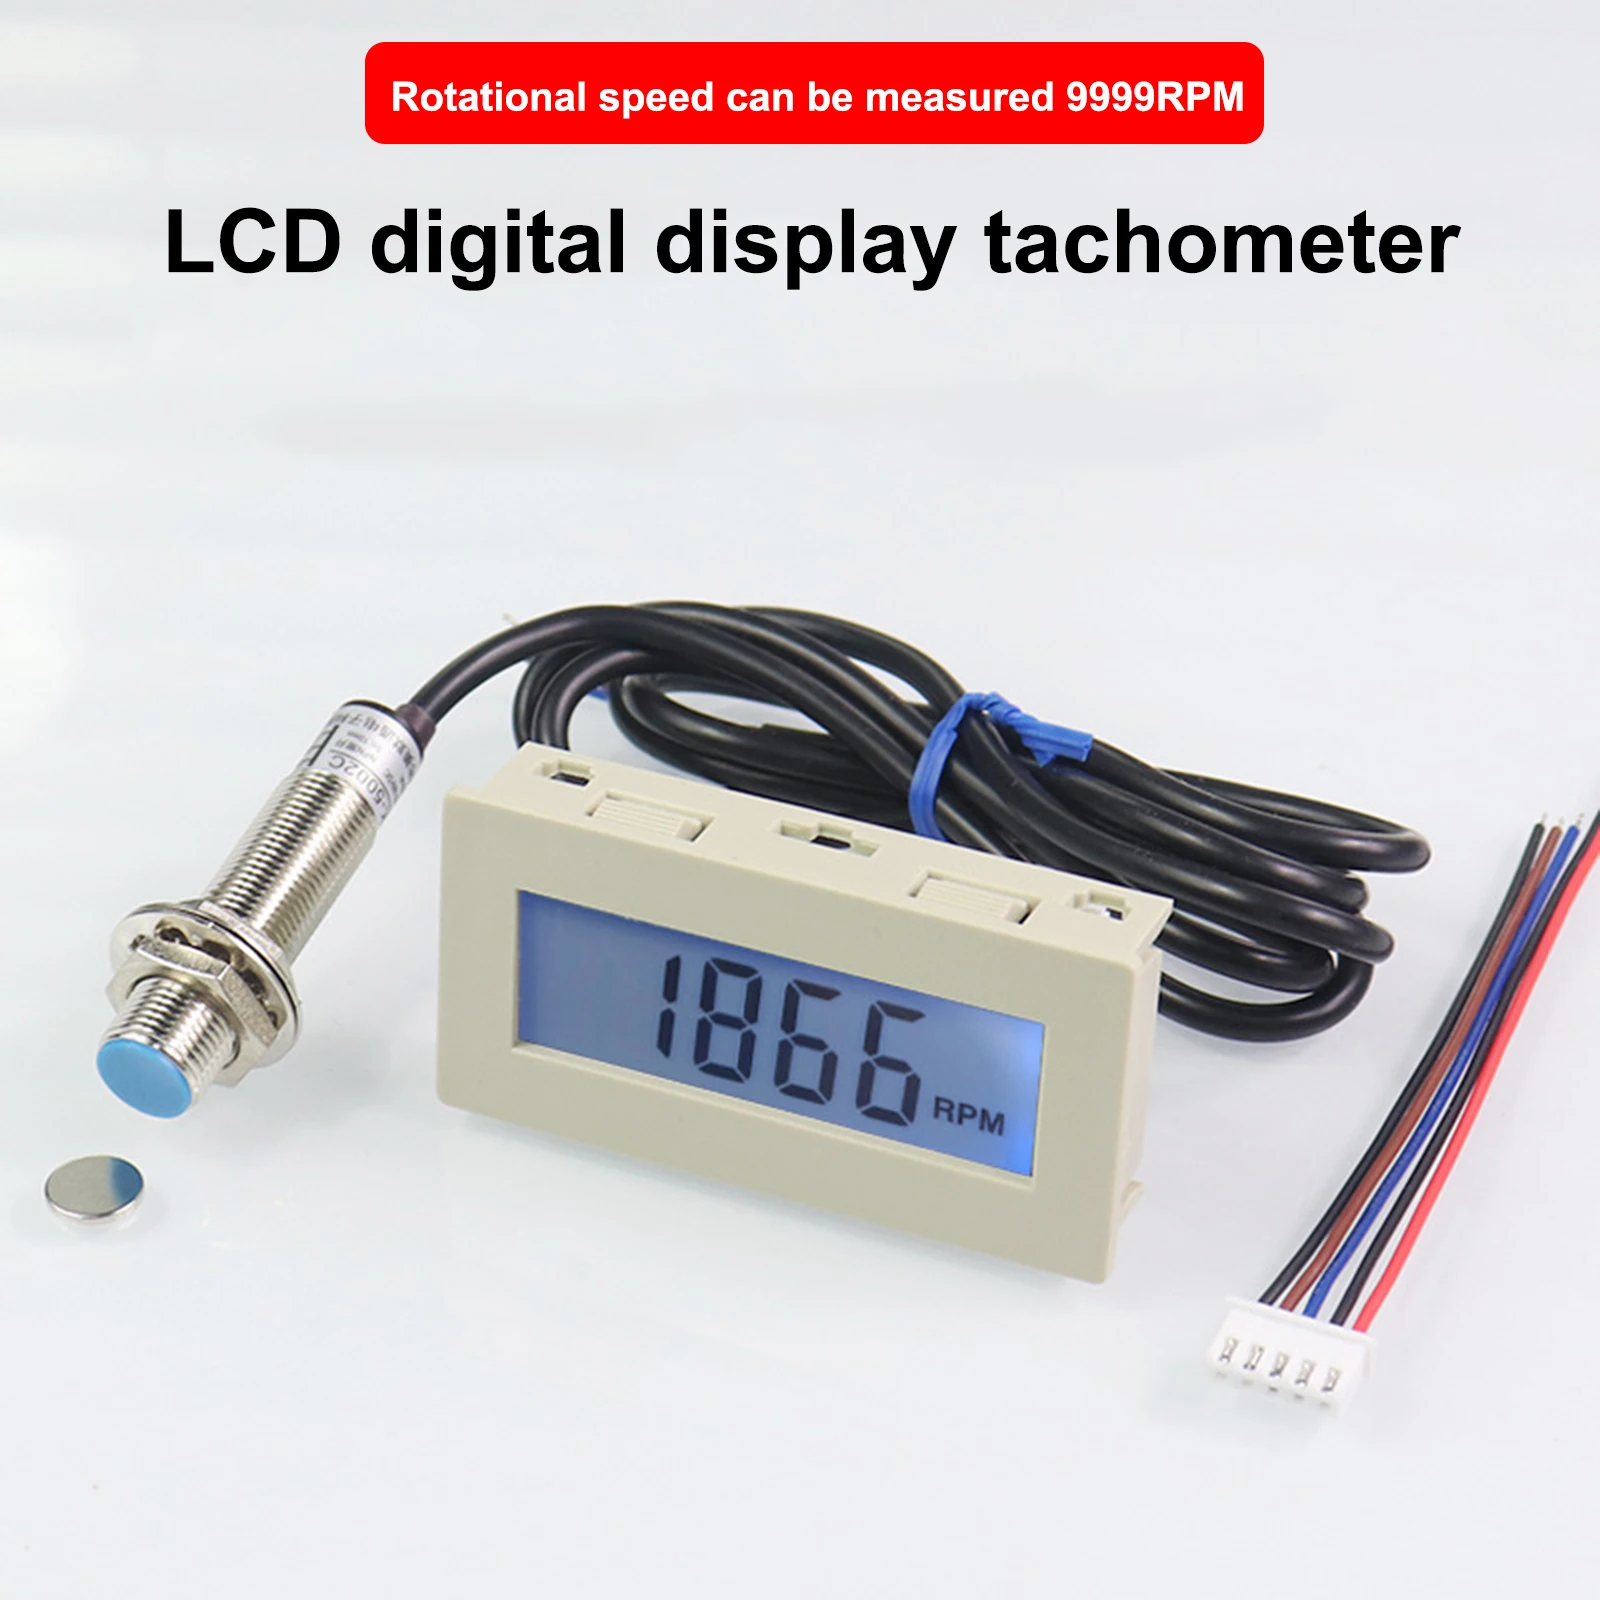 

DC 8-24V 40mA 10-9999RPM LCD Tachometer Hour Meter Motor Waterproof Display for Engine Tachometer with Hall Switch Sensor